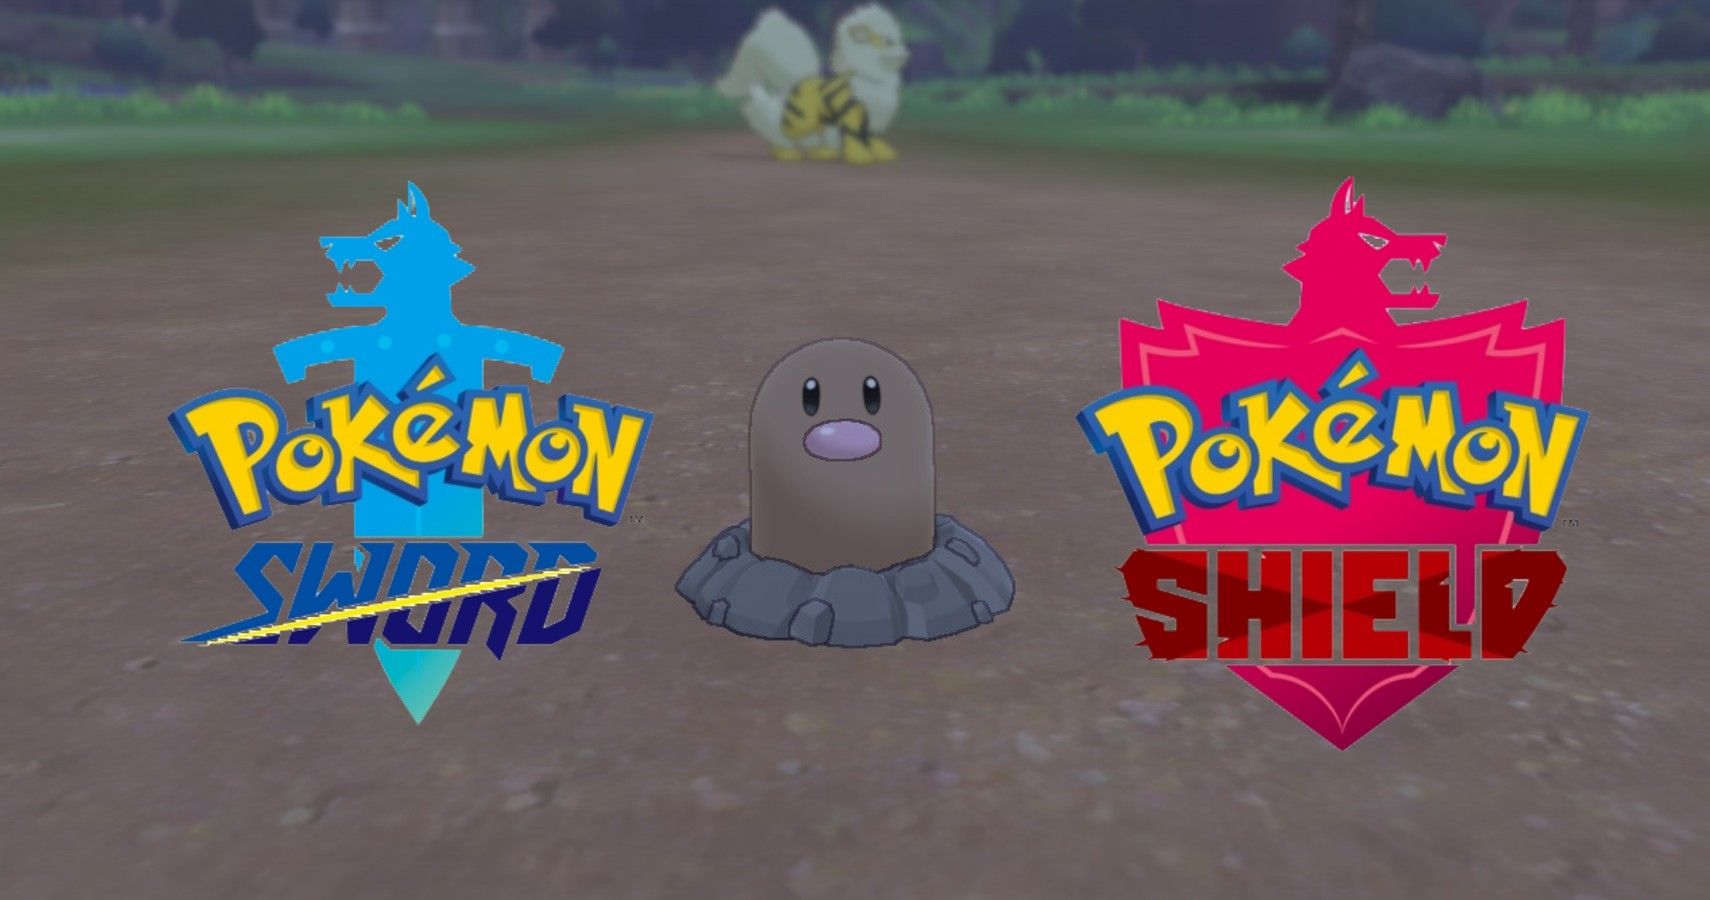 Why You Should Find (Most Of) The Diglett In Pokémon Sword And